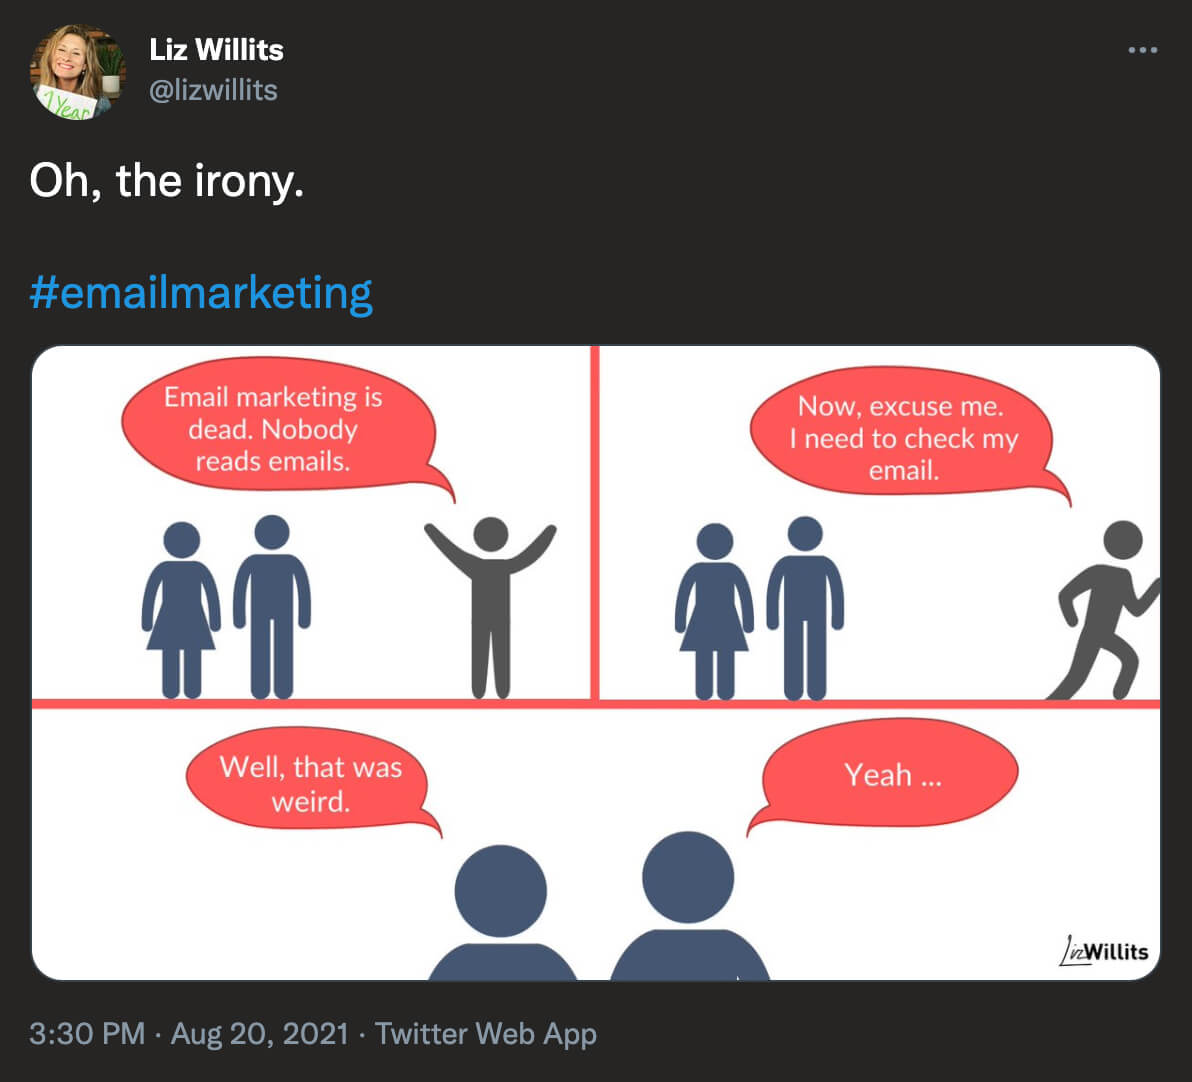 @lizwillits on Twitter: Oh, the iron. #emailmarketing comic of three people talking, one says 'Email marketing is dead. Nobody reads emails.' then runs off saying 'Now, excuse me. I need to check my email.'